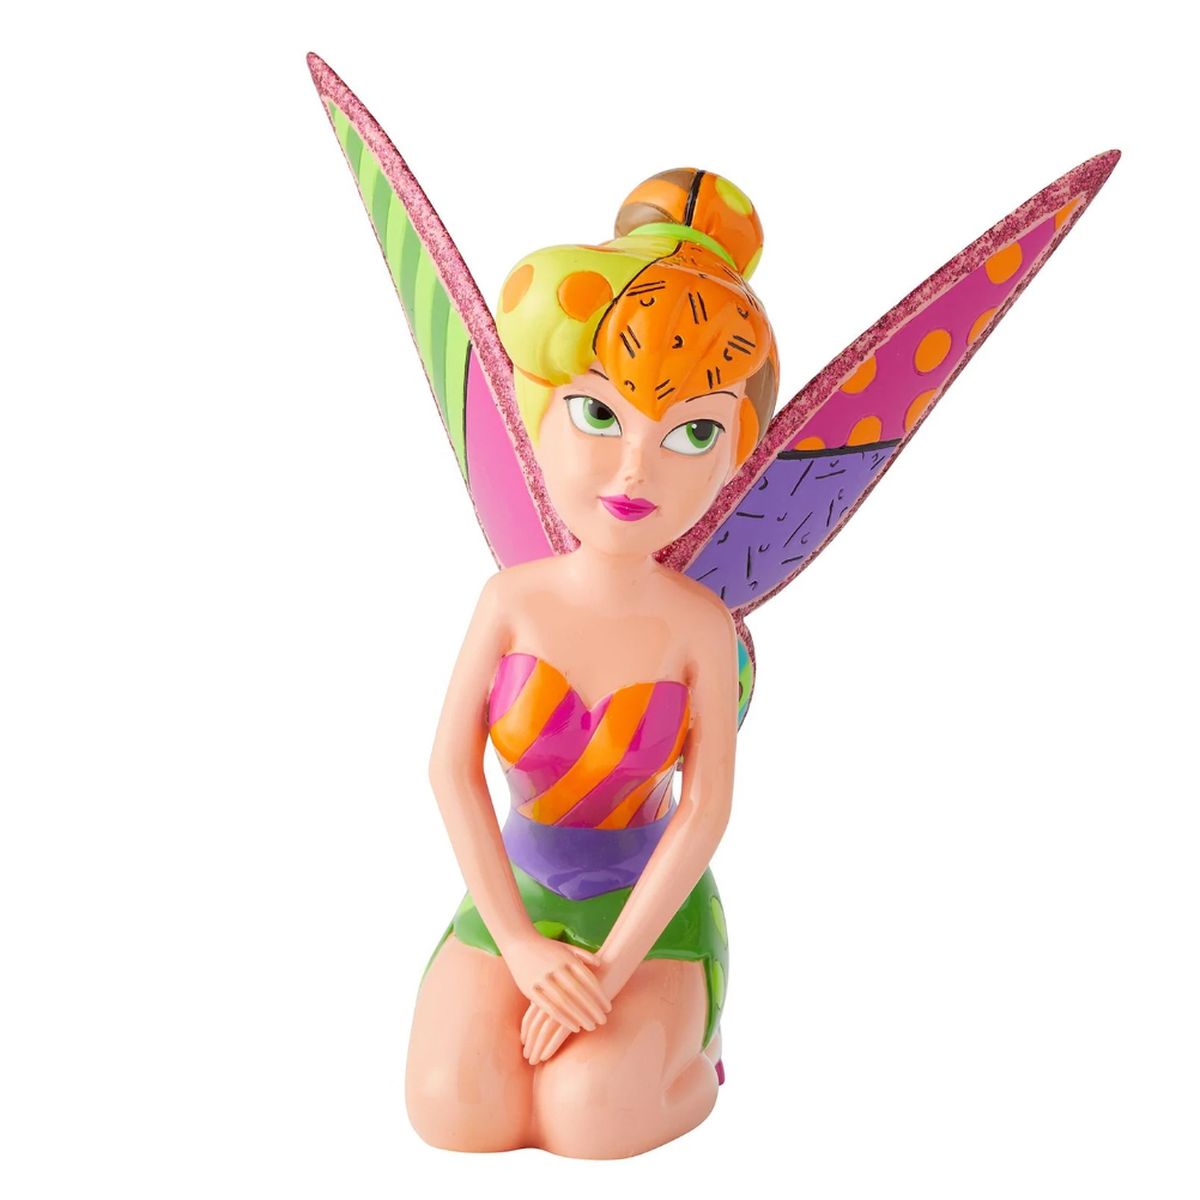 Statuette de collection Tinker Bell by Britto